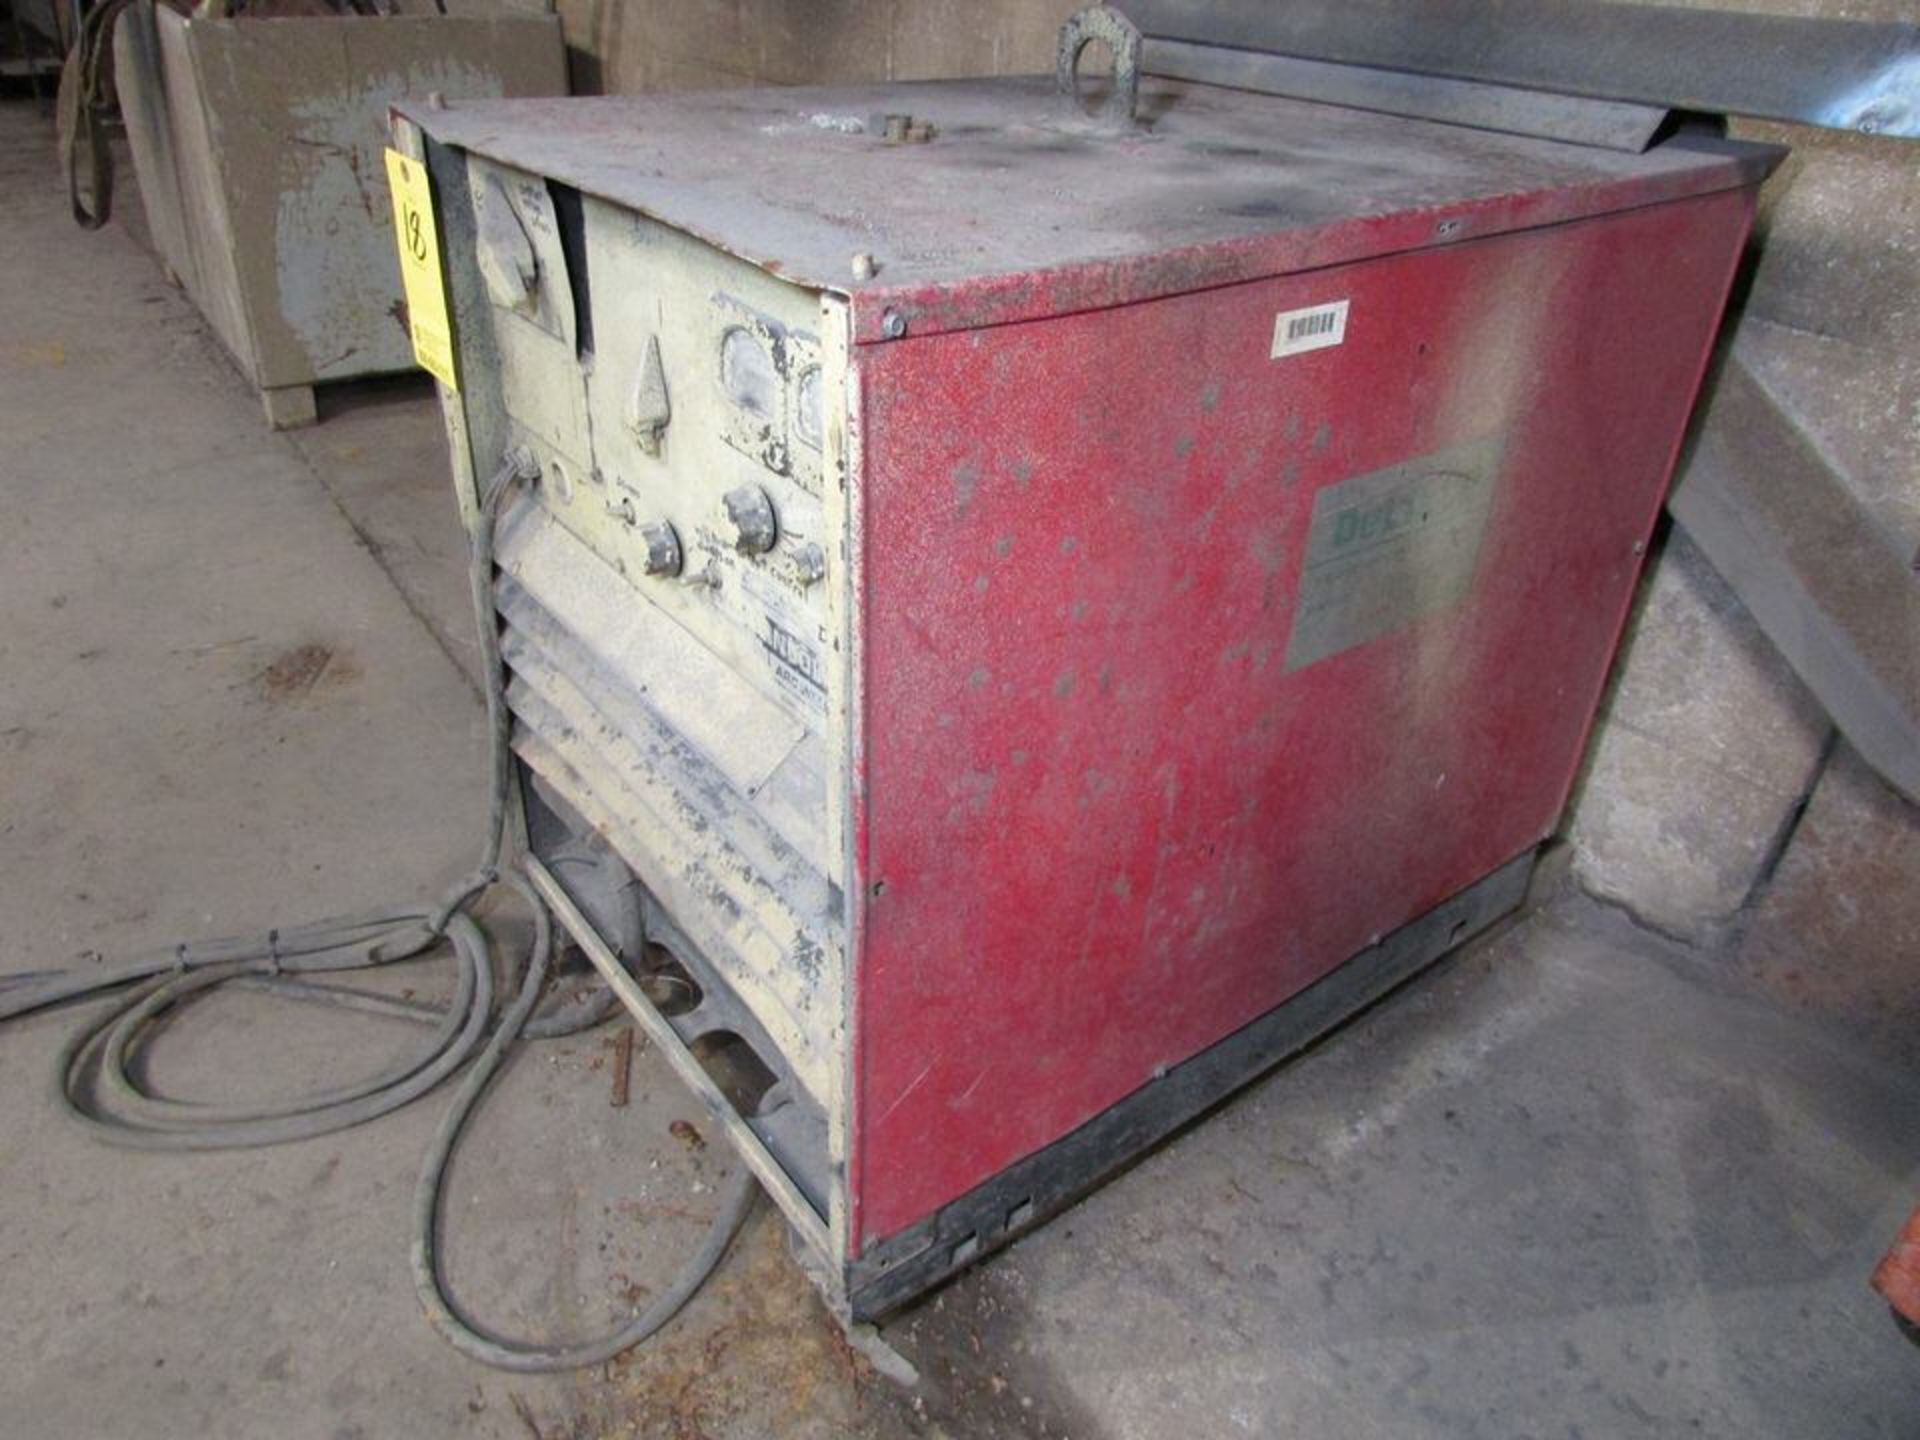 Lincoln Electric Idealarc DC-400 CV CC DC Welding Power Source, 400A Output, 230/460V 3PH Input, s/ - Image 5 of 10